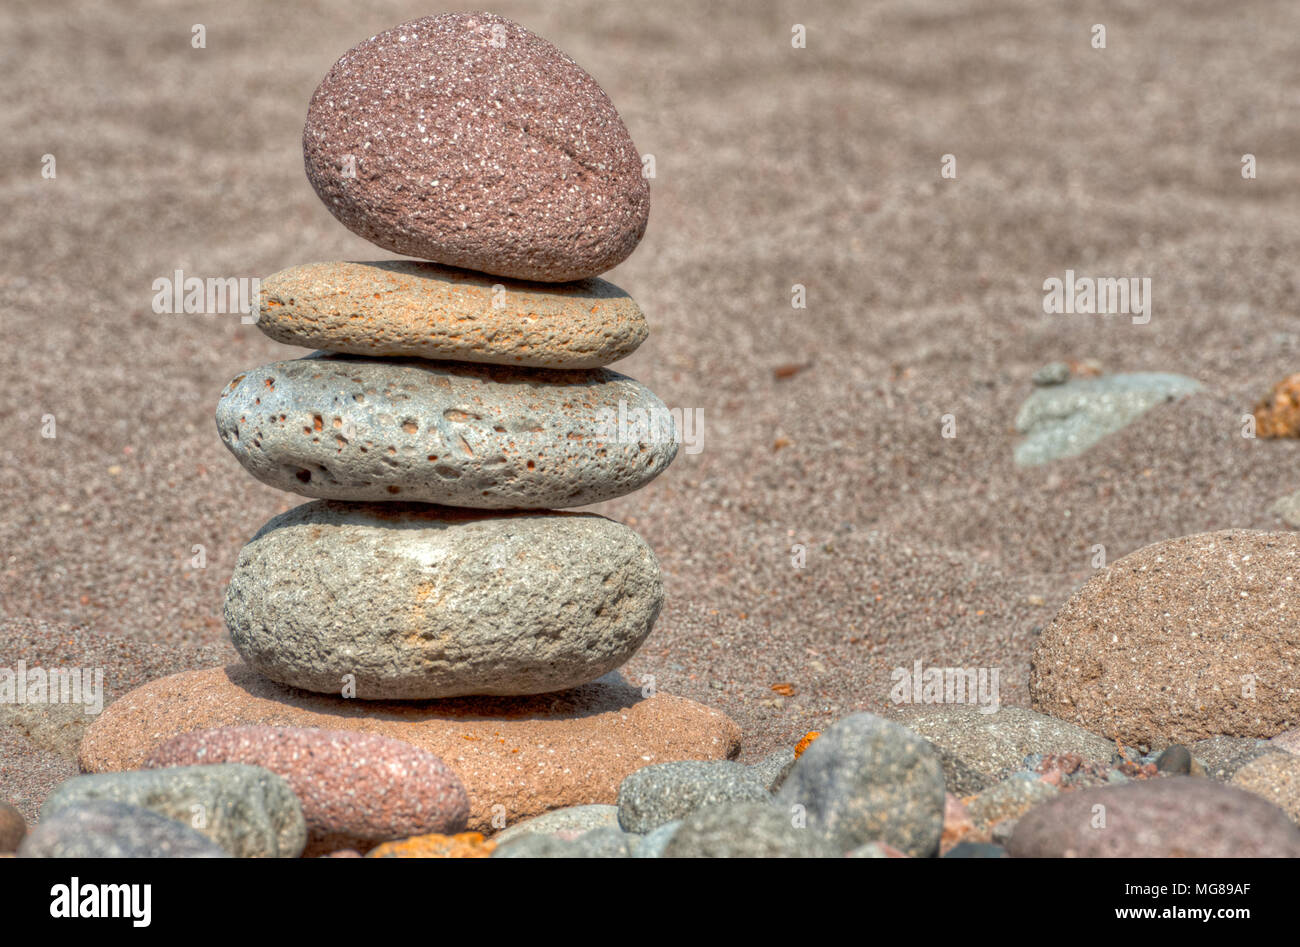 At Oxbow Park, along the Sandy River, has a beach where rocks are staked by anyone who visits the area creating a village of stacked rocks. Stock Photo